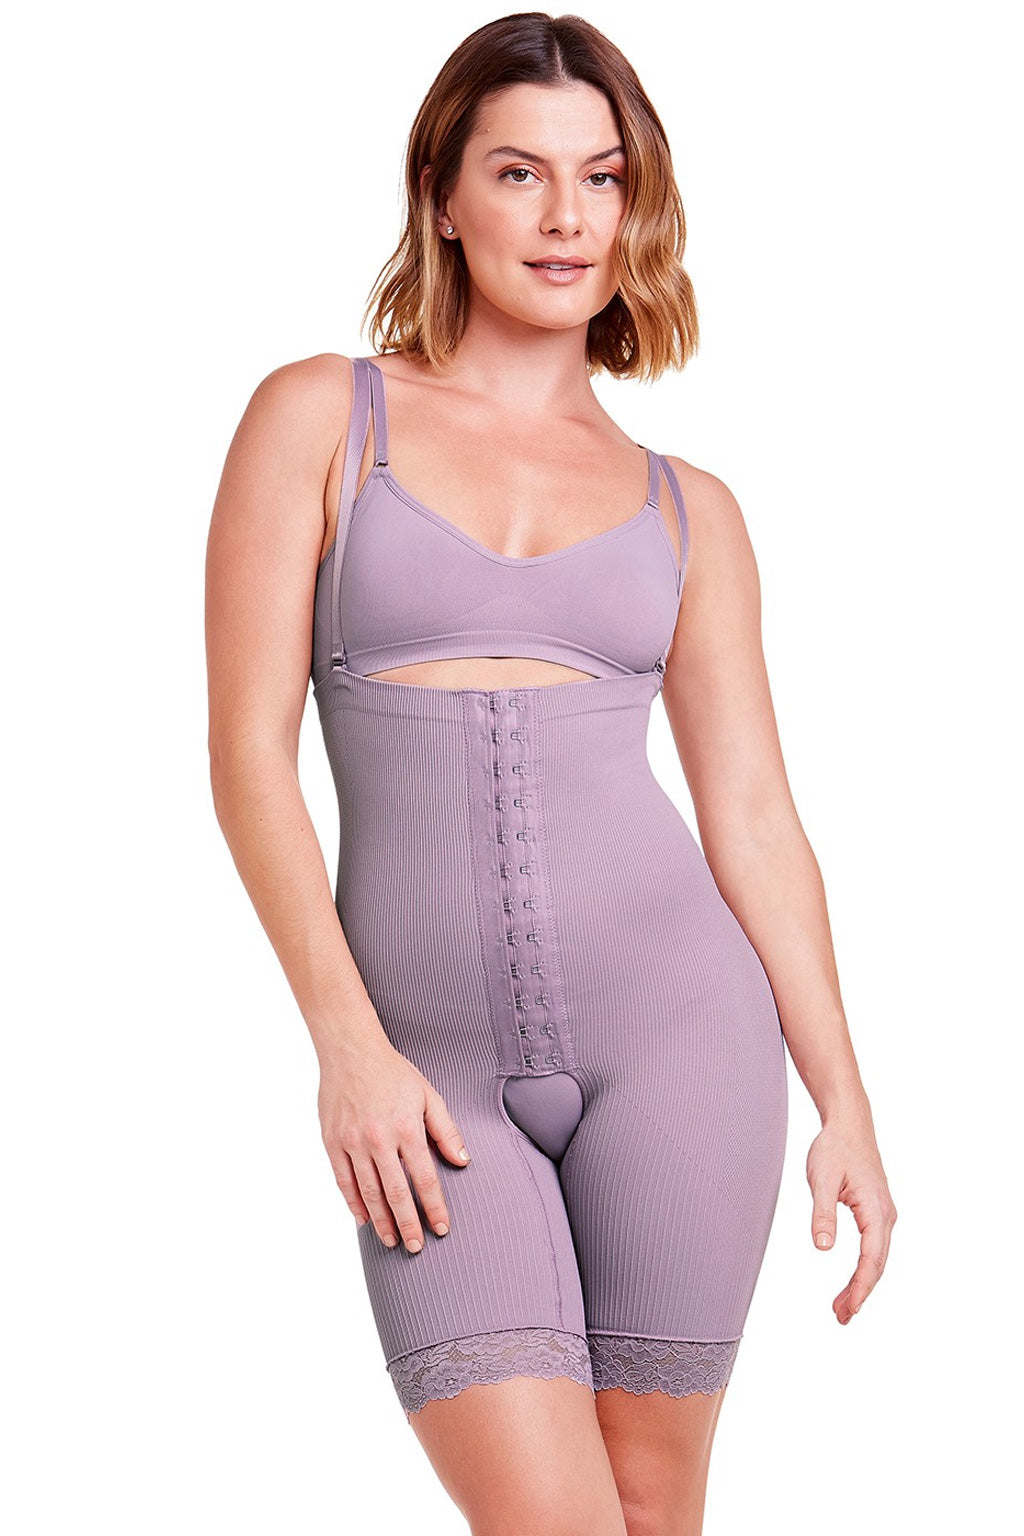 BODY Corset WITH MODELING BRA